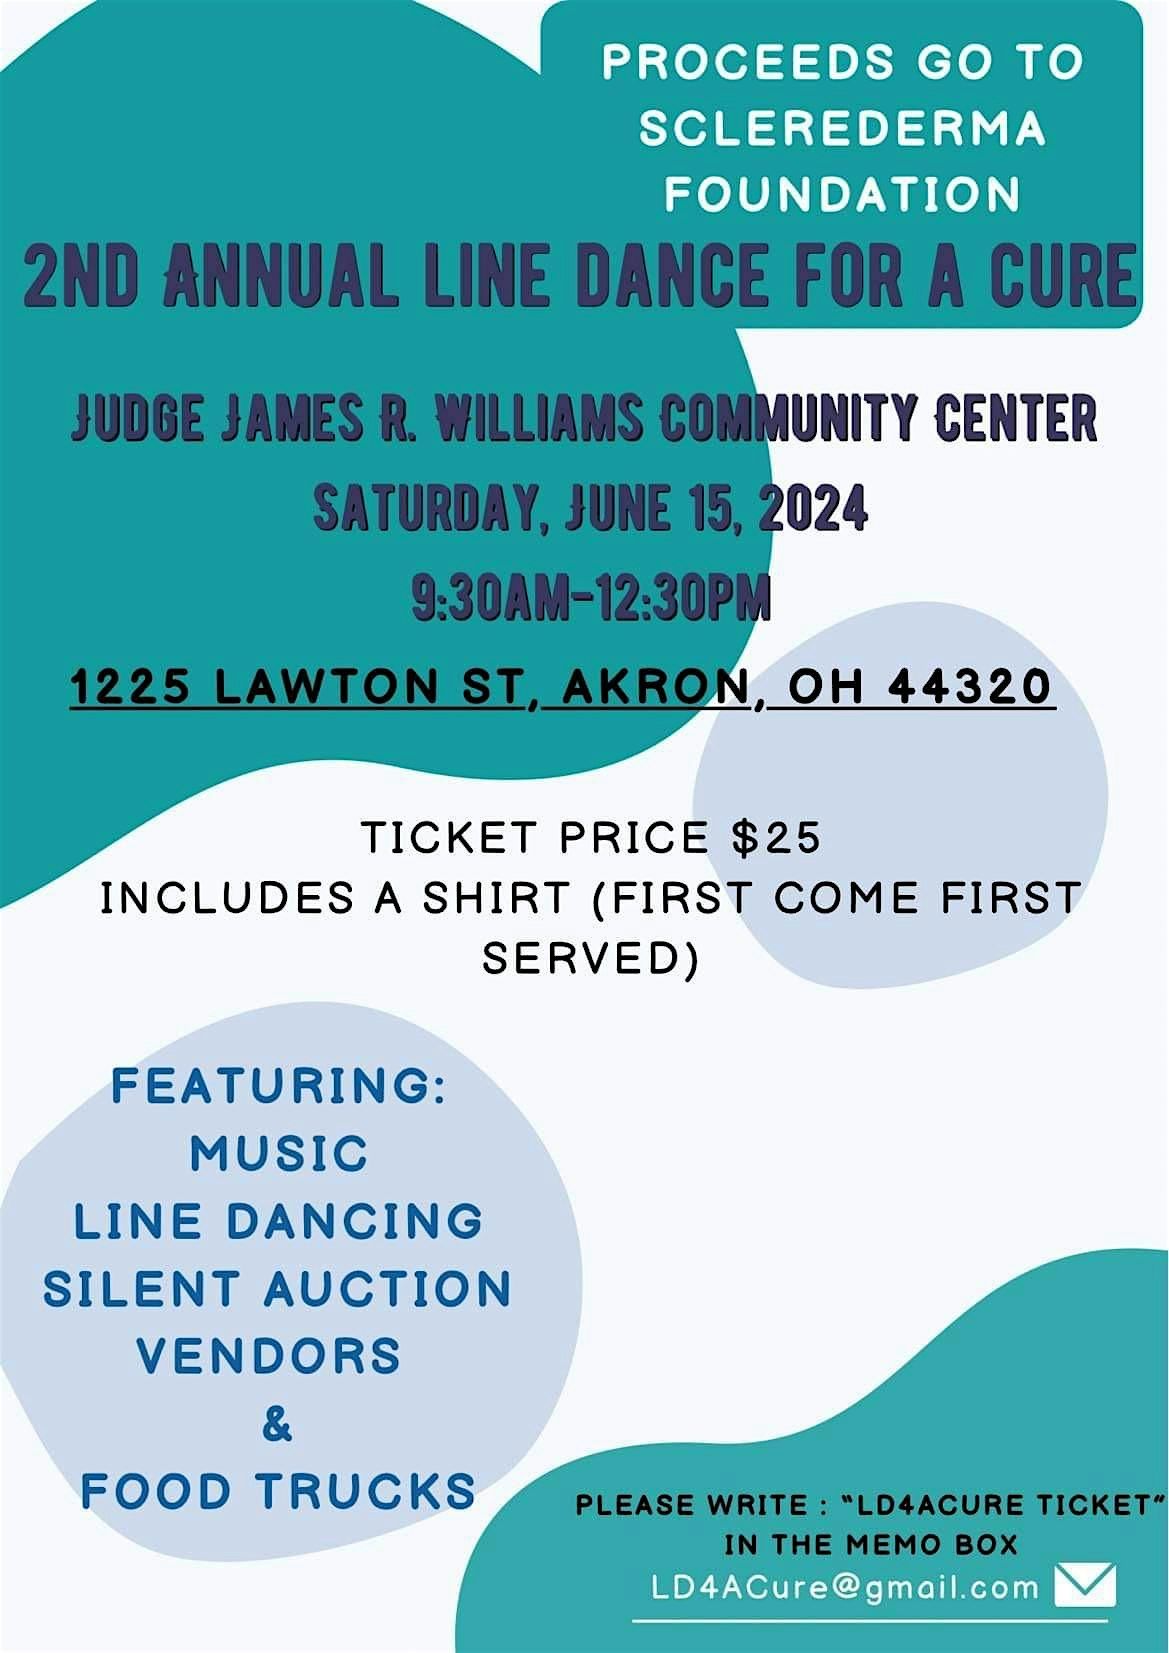 2nd Annual Scleroderma Line Dance 4 a Cure